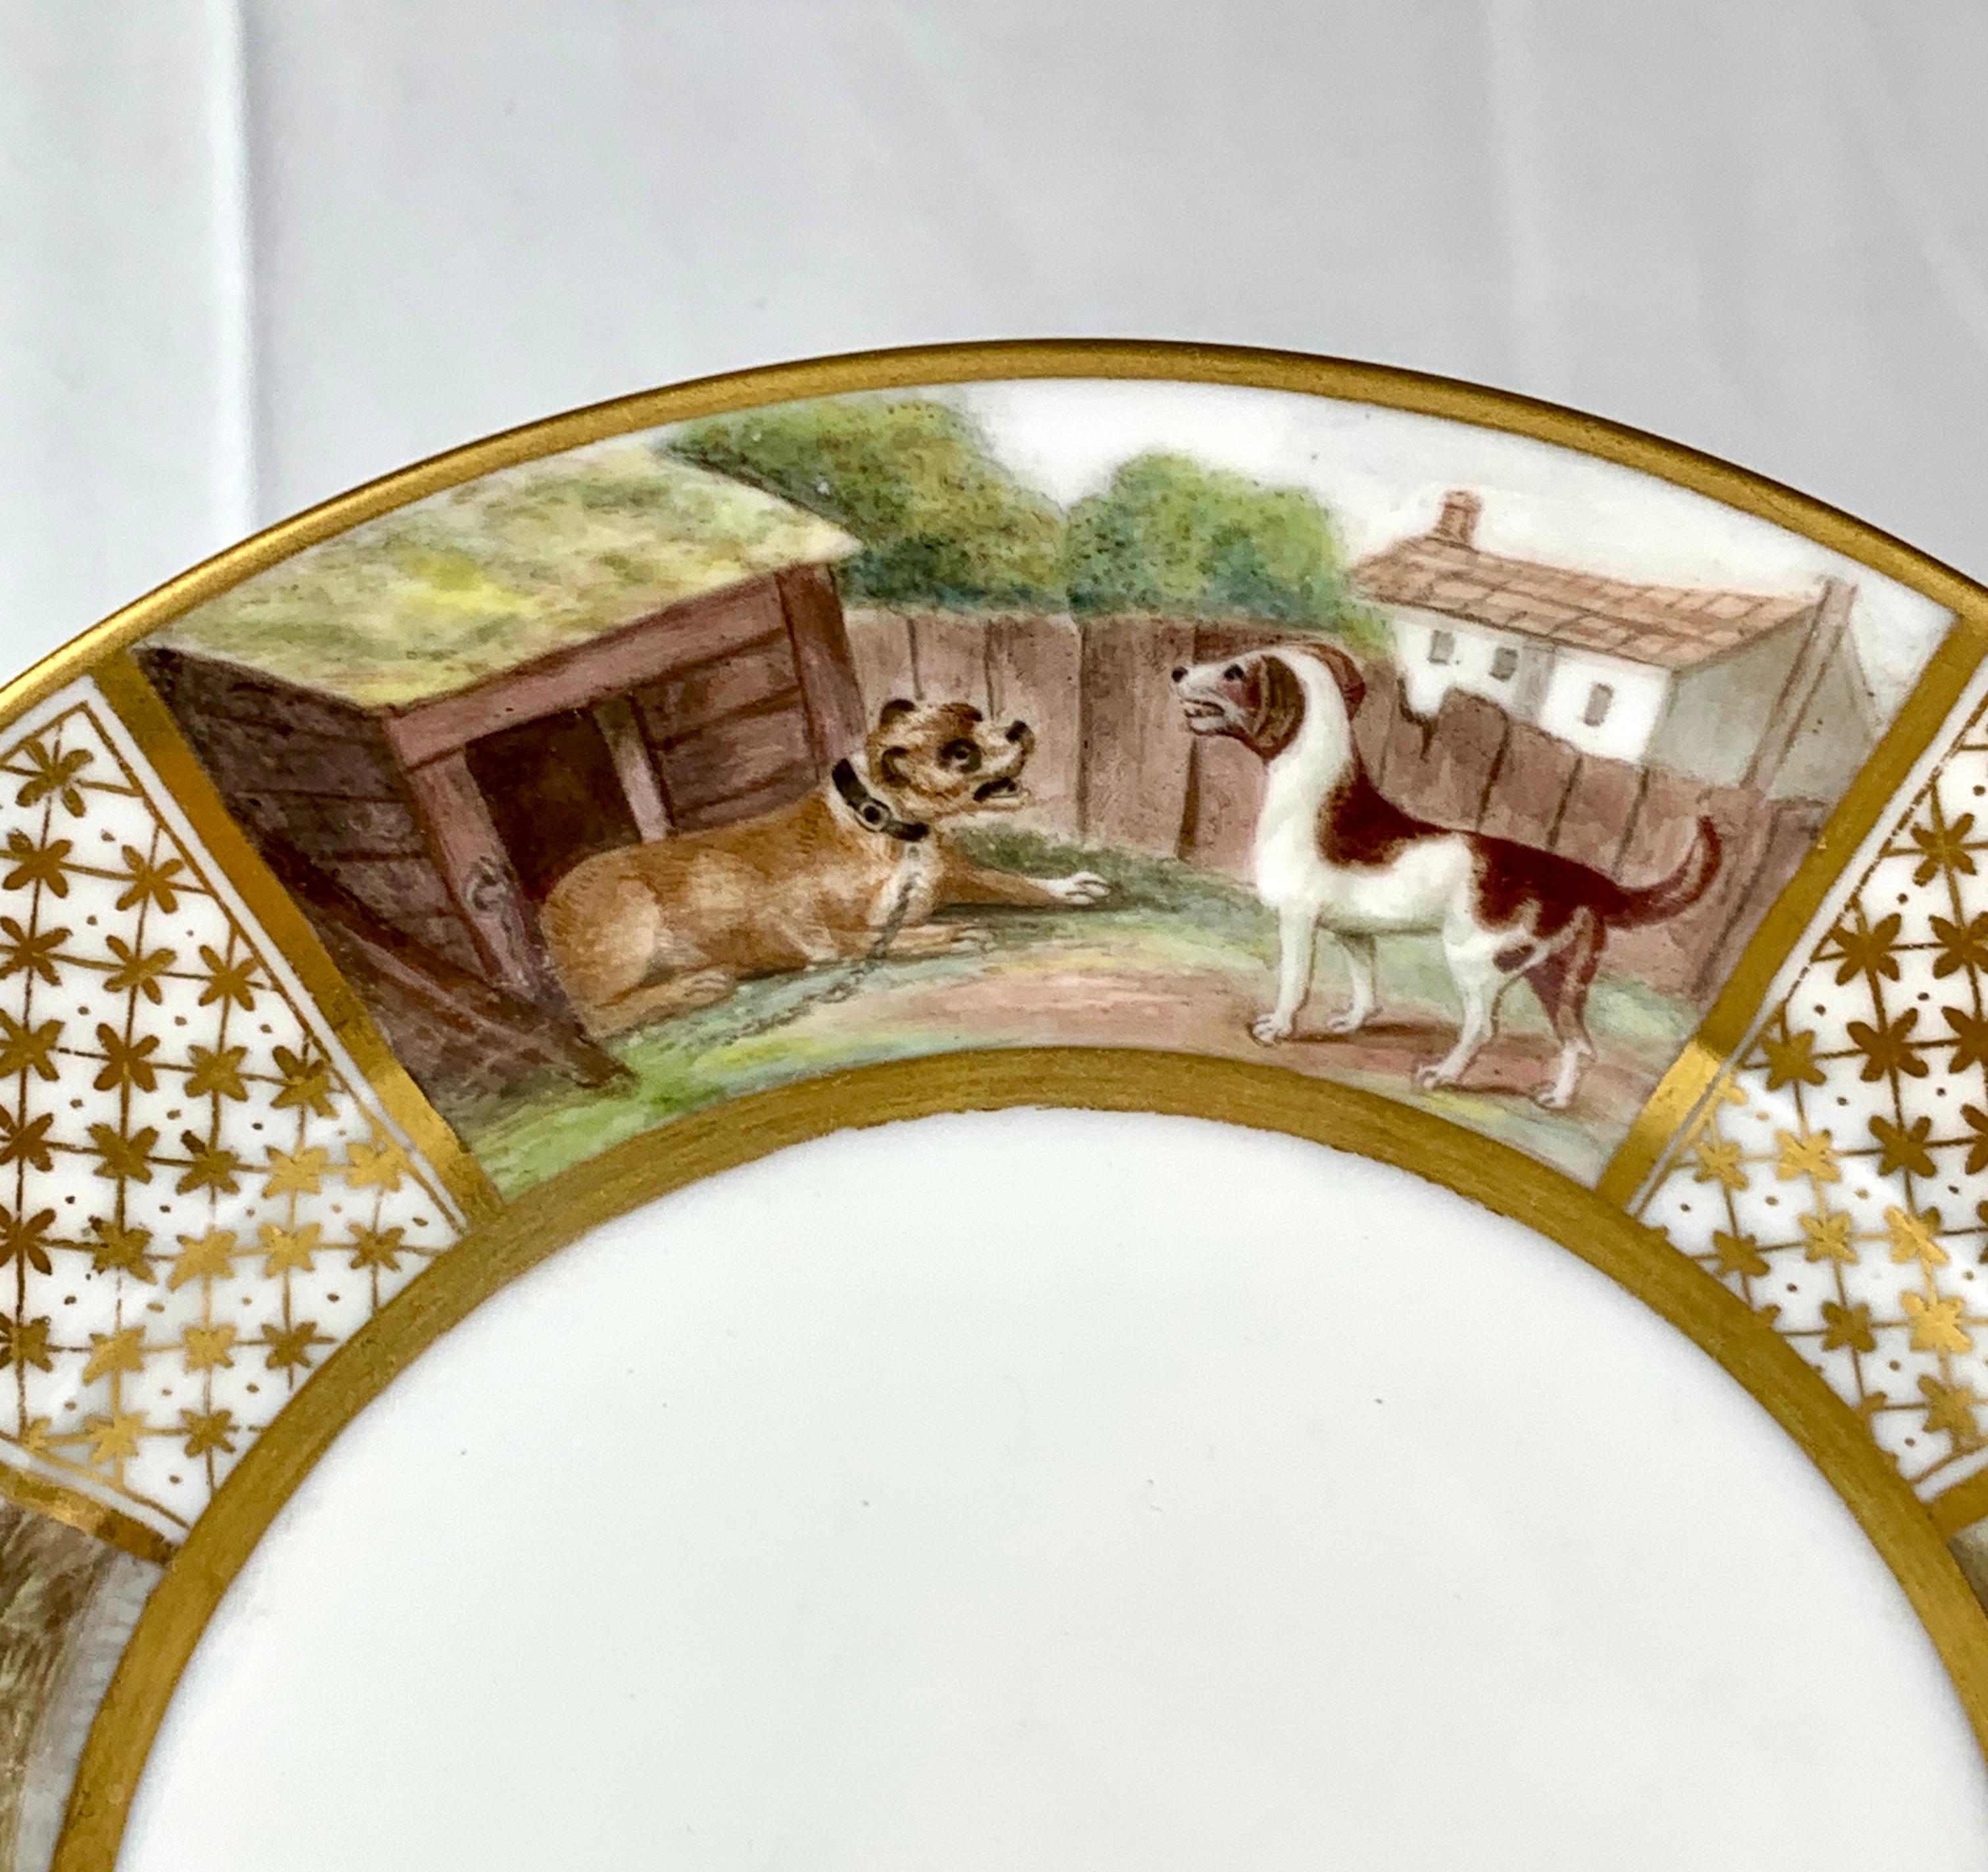 Aesop's Fables Animals on Antique French Porcelain Plate Hand Painted circa 1825 In Excellent Condition For Sale In Katonah, NY